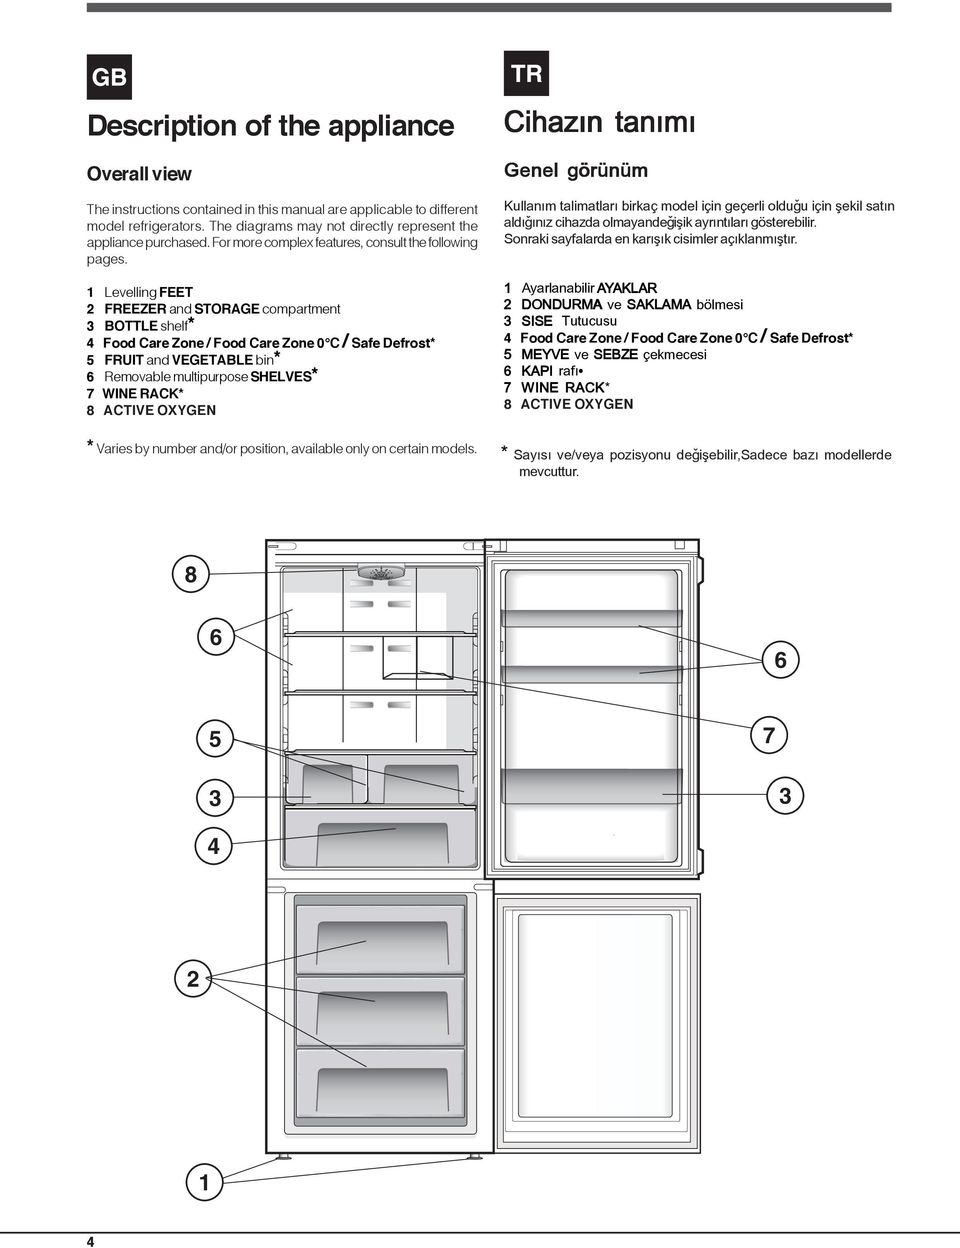 1 Levelling FEET 2 FREEZER and STORAGE compartment 3 BOTTLE shelf* 4 Food Care Zone / Food Care Zone 0 C / Safe Defrost* 5 FRUIT and VEGETABLE bin* 6 Removable multipurpose SHELVES* 7 WINE RACK* 8